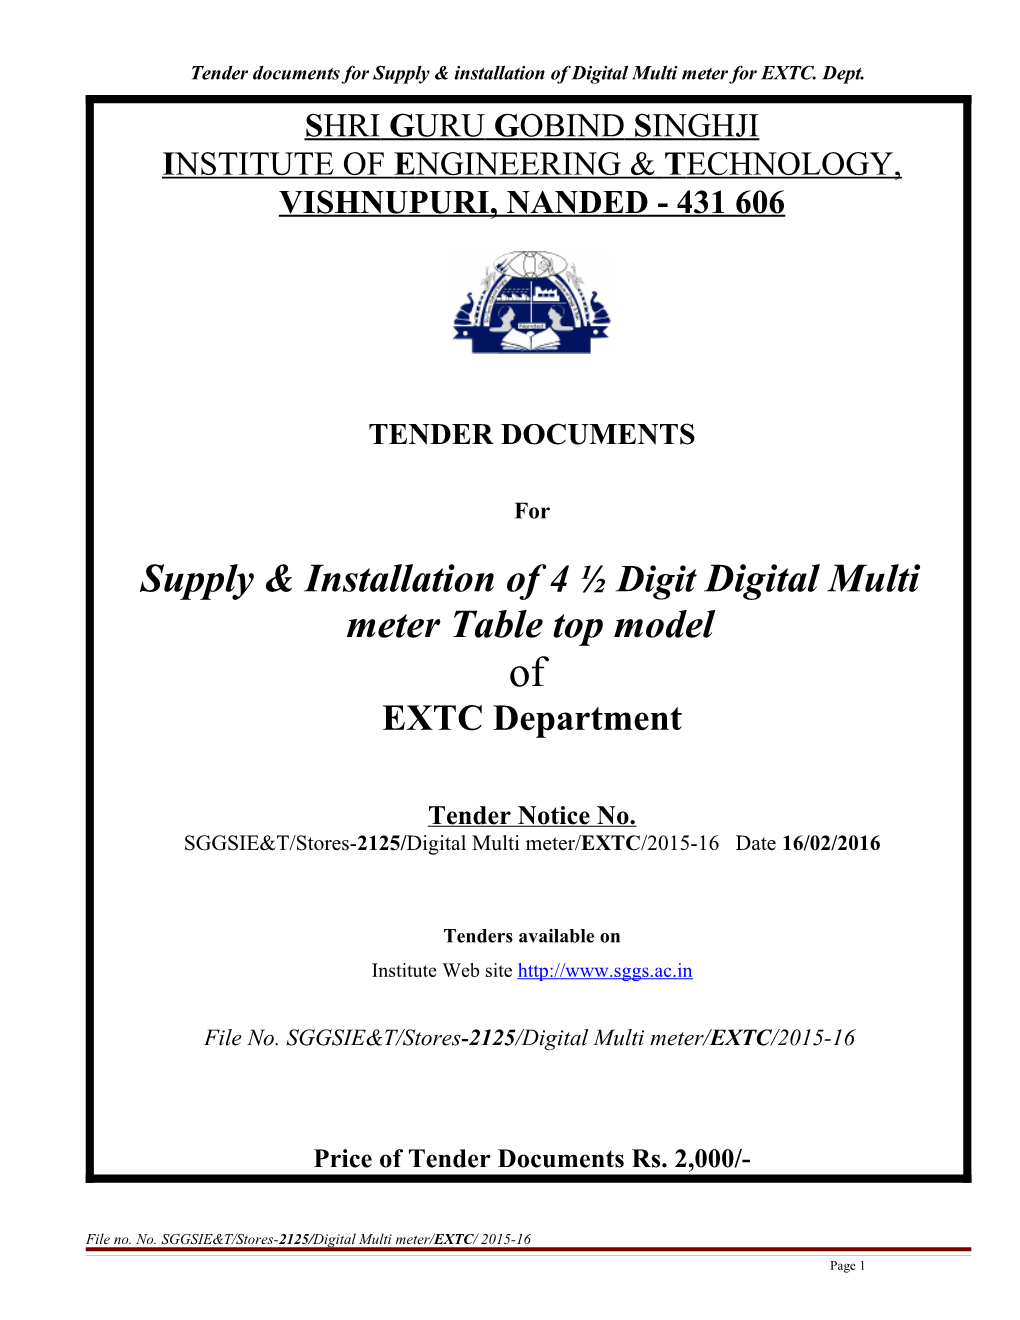 Tender Documents for Supply & Installation of Digital Multi Meter for EXTC. Dept